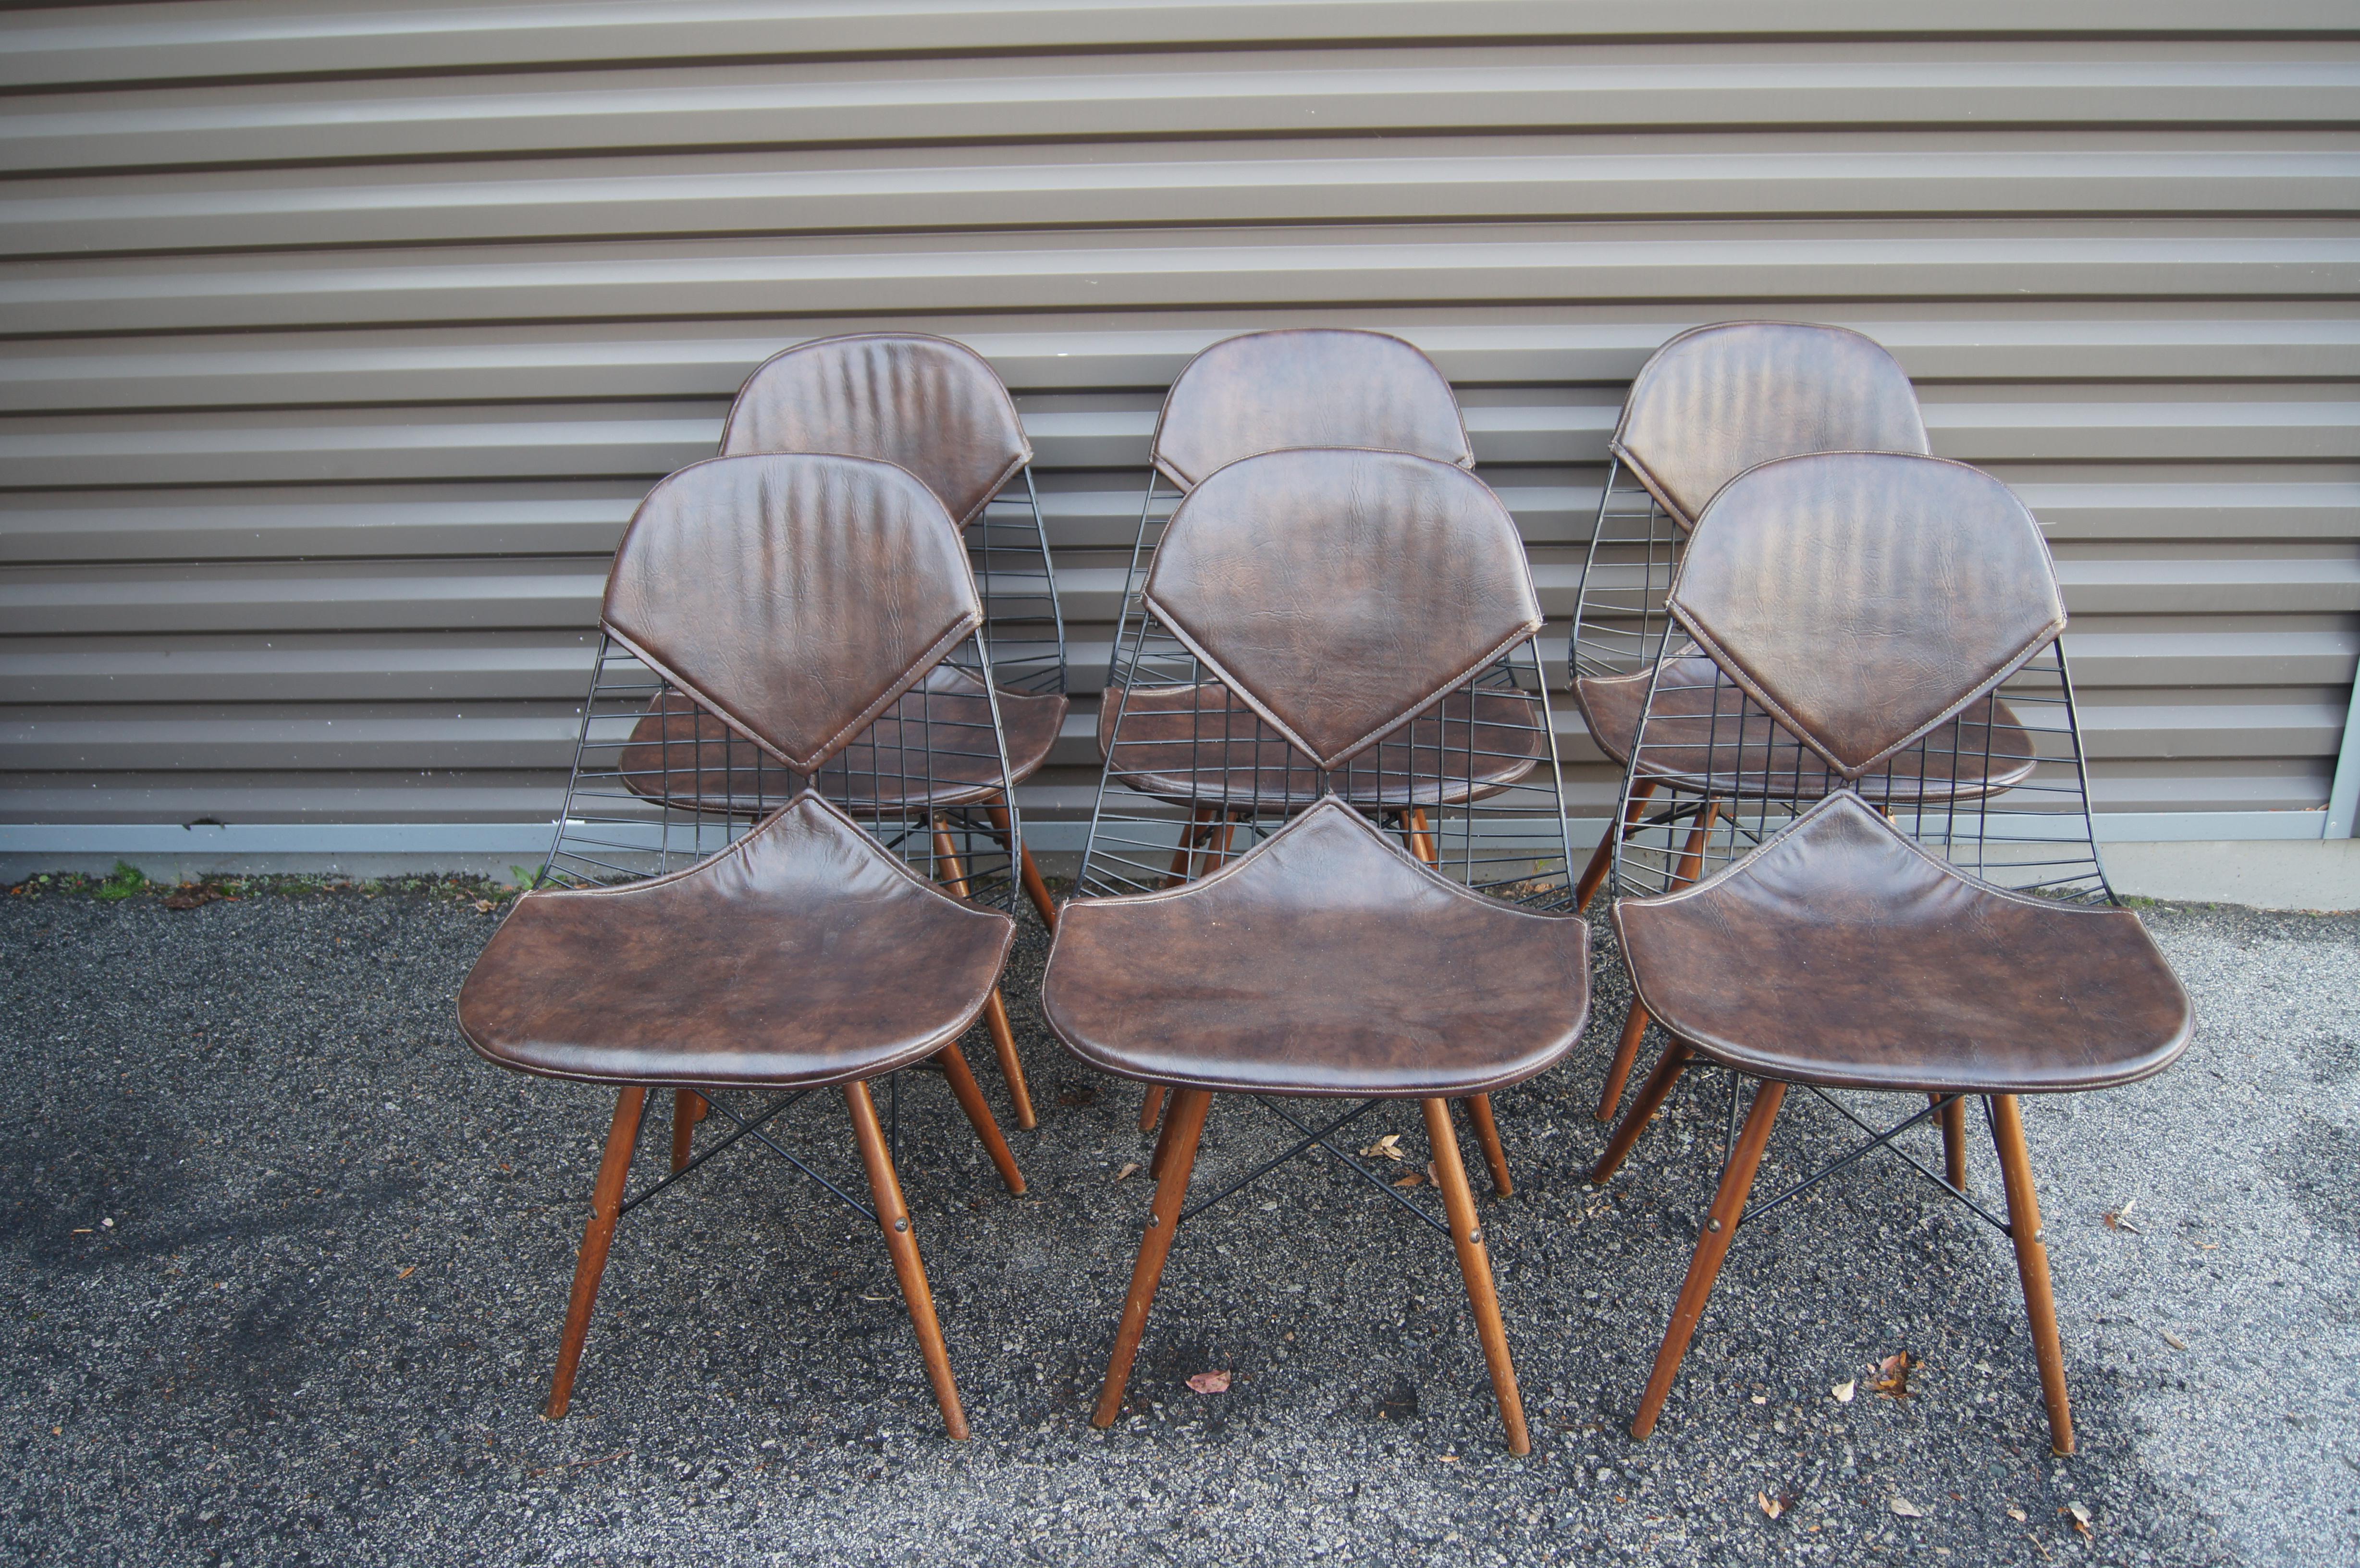 Charles and Ray Eames designed their classic wire dining chairs for Herman Miller in 1951. This early set of six chairs features black powder-coated wire frames on wooden dowel legs with brown leather 